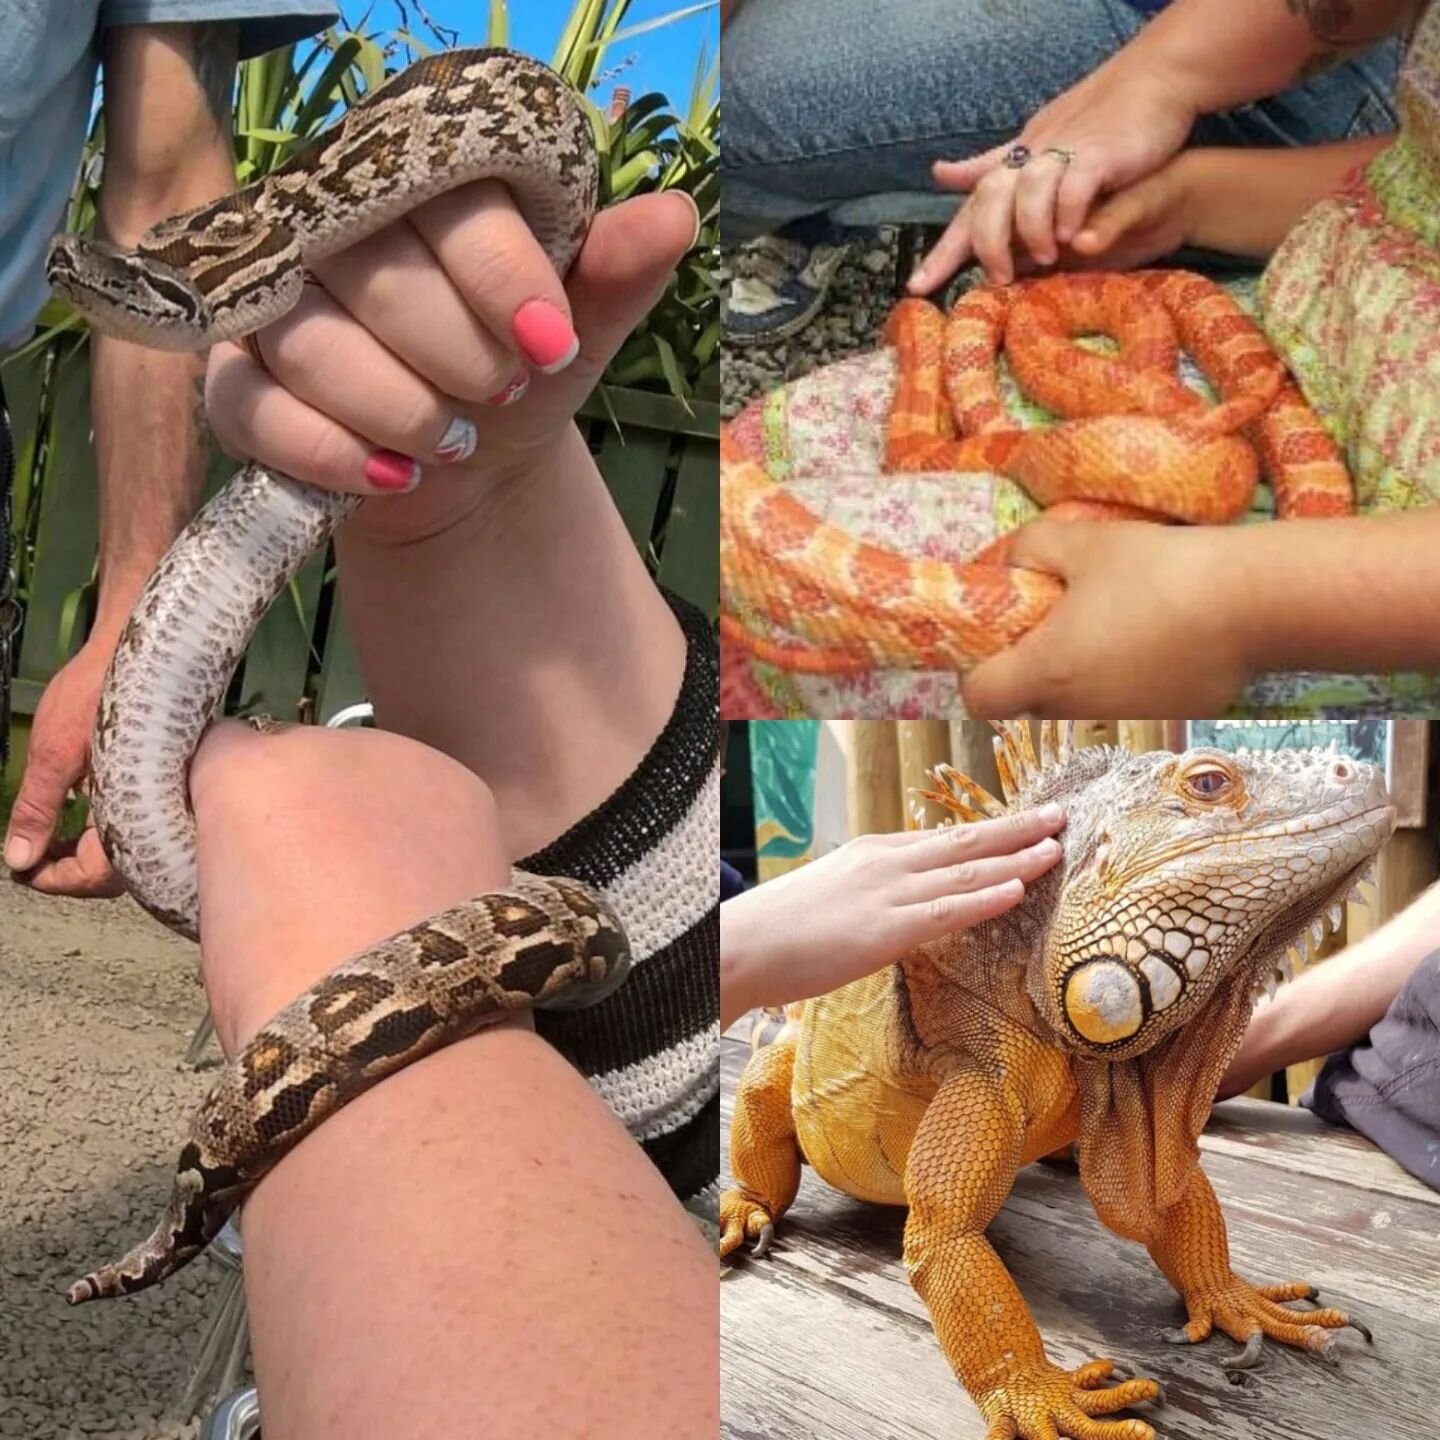 Less than a week to go before our first VIP day of the year (Saturday 8th April)!

If you are in the area on holiday this Easter, or fancy a day trip, this is definitely the day to visit! Our new reptile house will be open, and our reptile talk and h